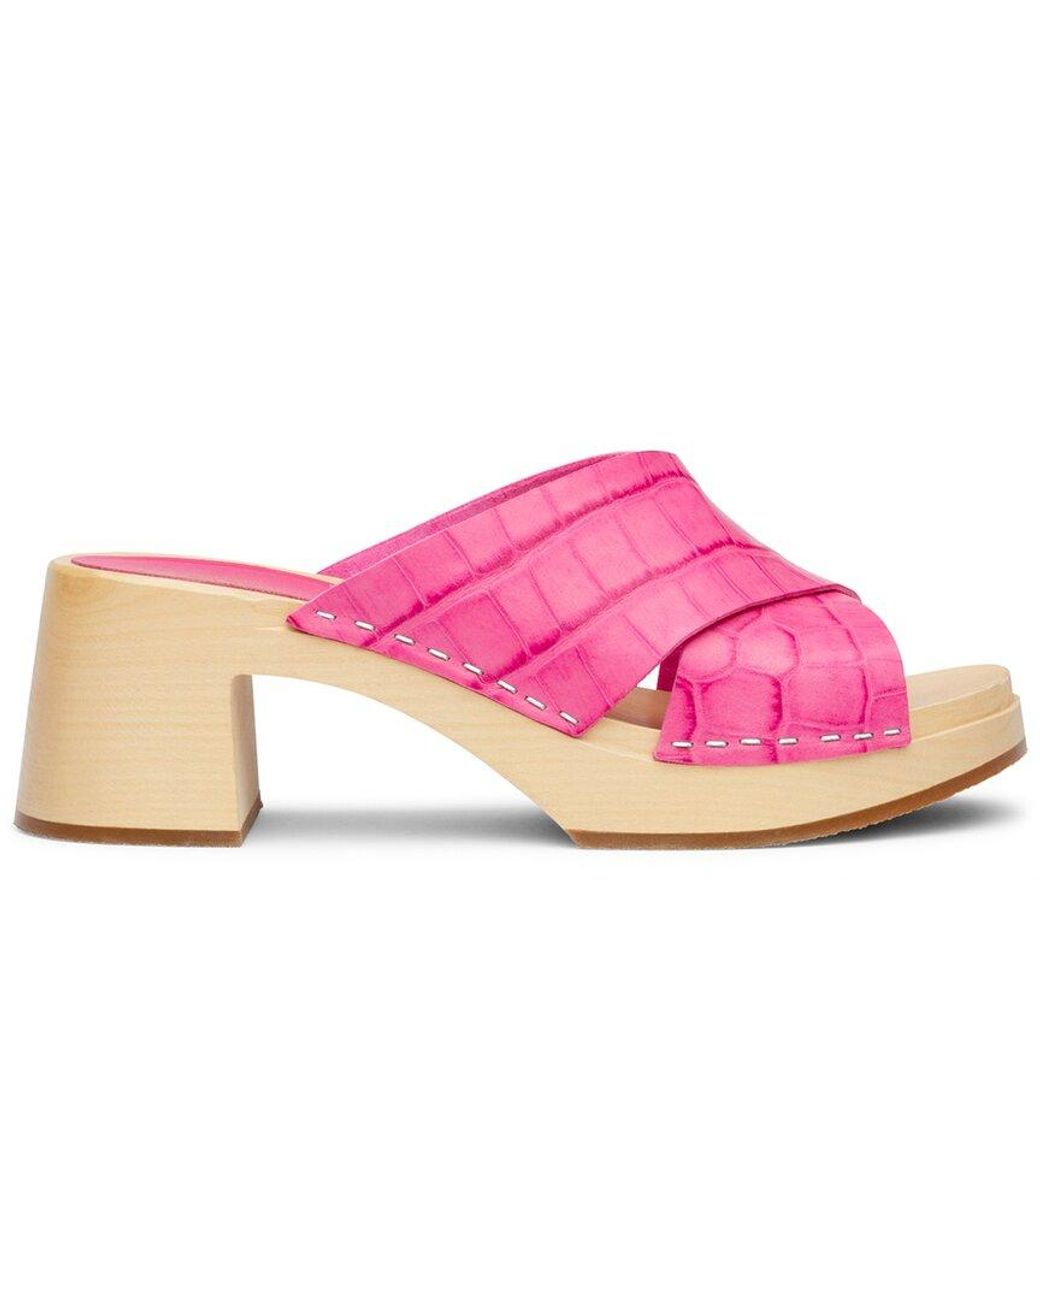 Swedish Hasbeens Anette High Leather Sandal in Pink | Lyst